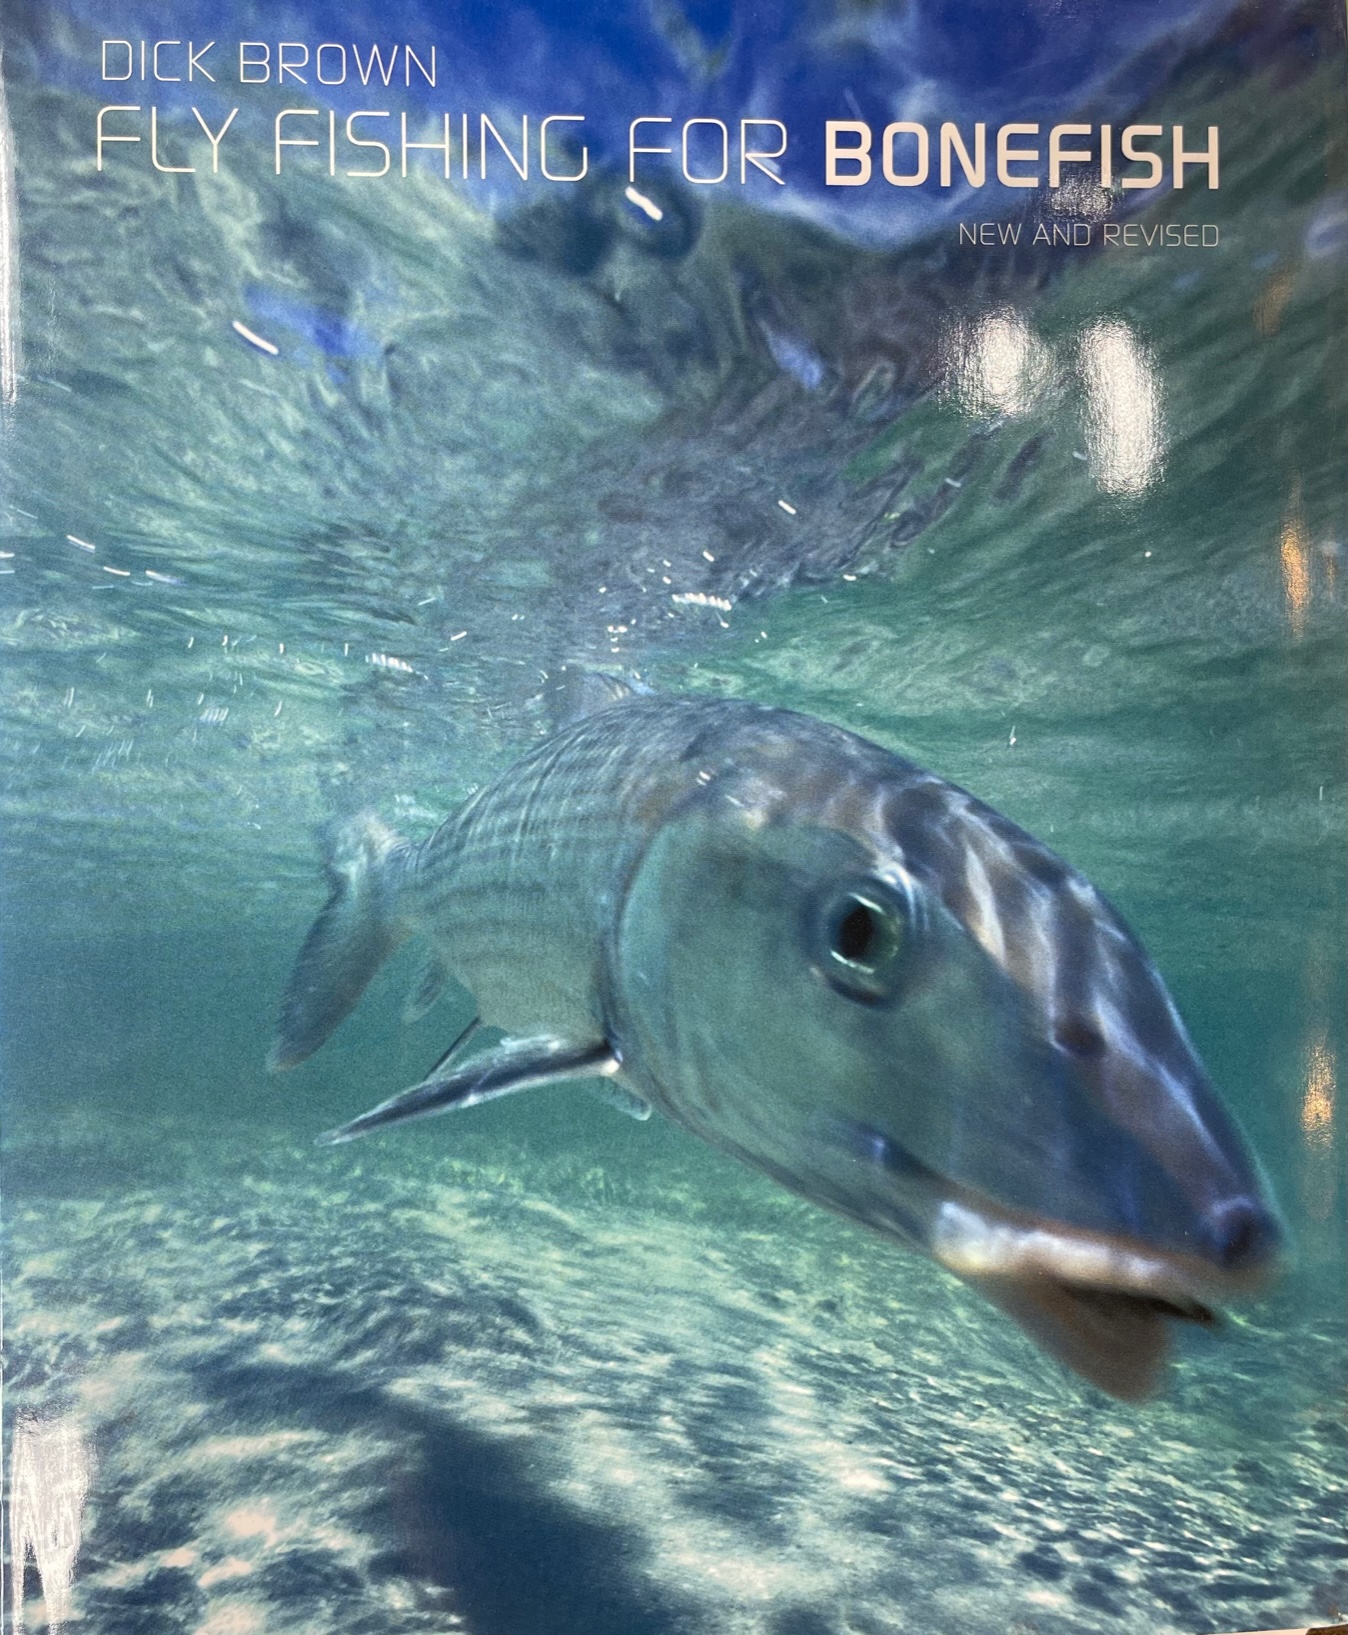 Fly Fishing for Bonefish - by Dick Brown